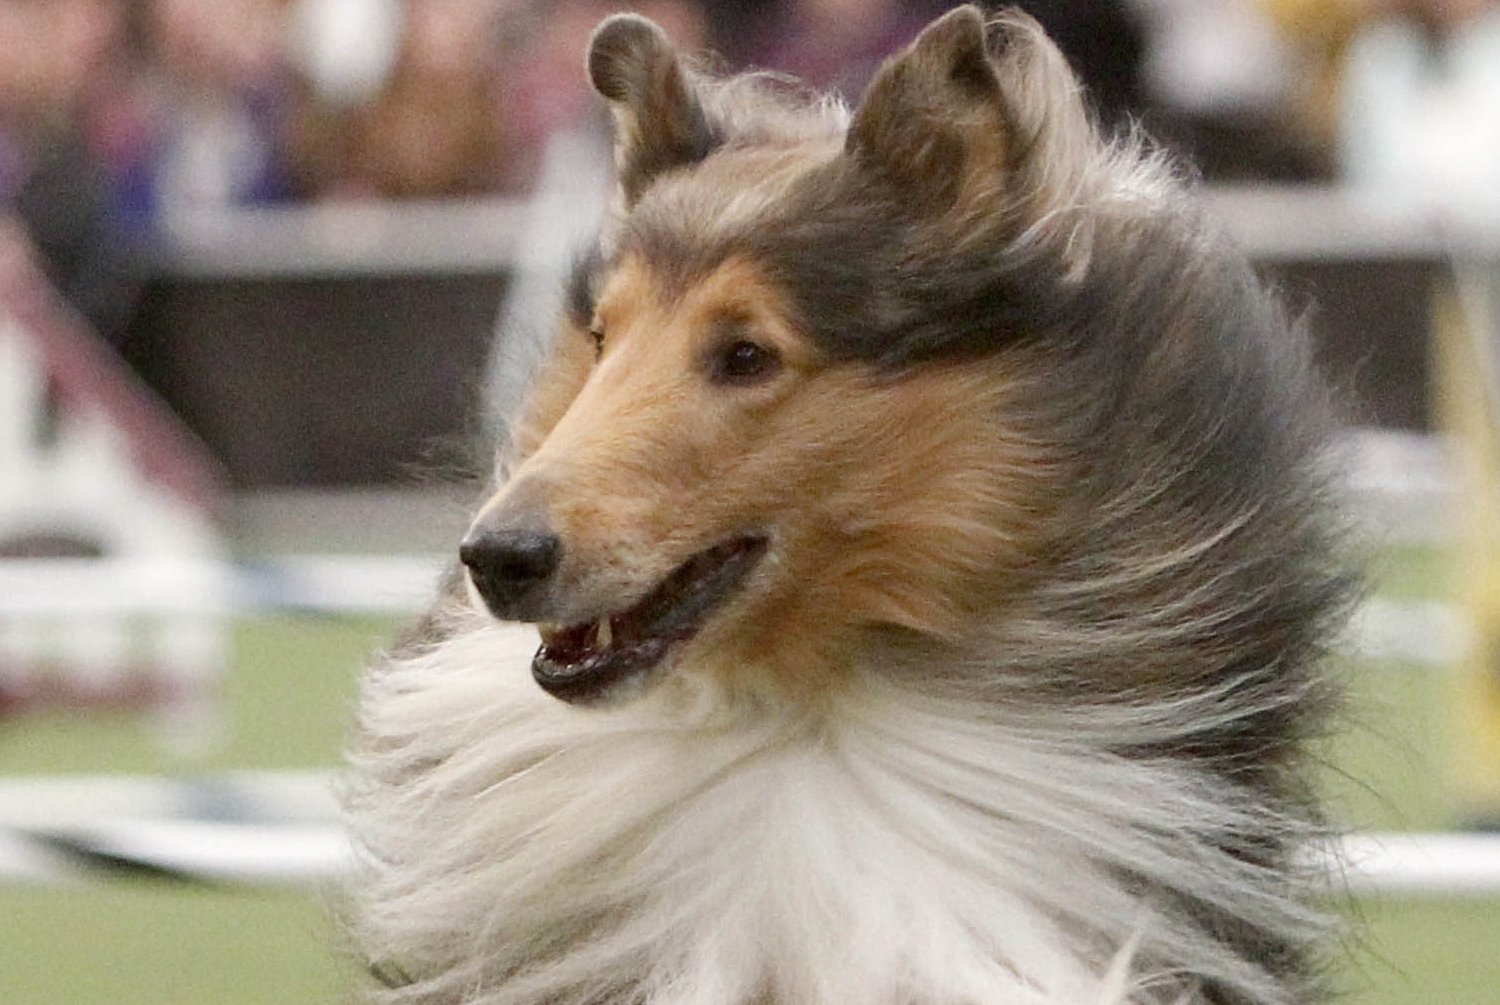 National Dog Show 2015 Results: Best in Show and List of Winners | Bleacher Report